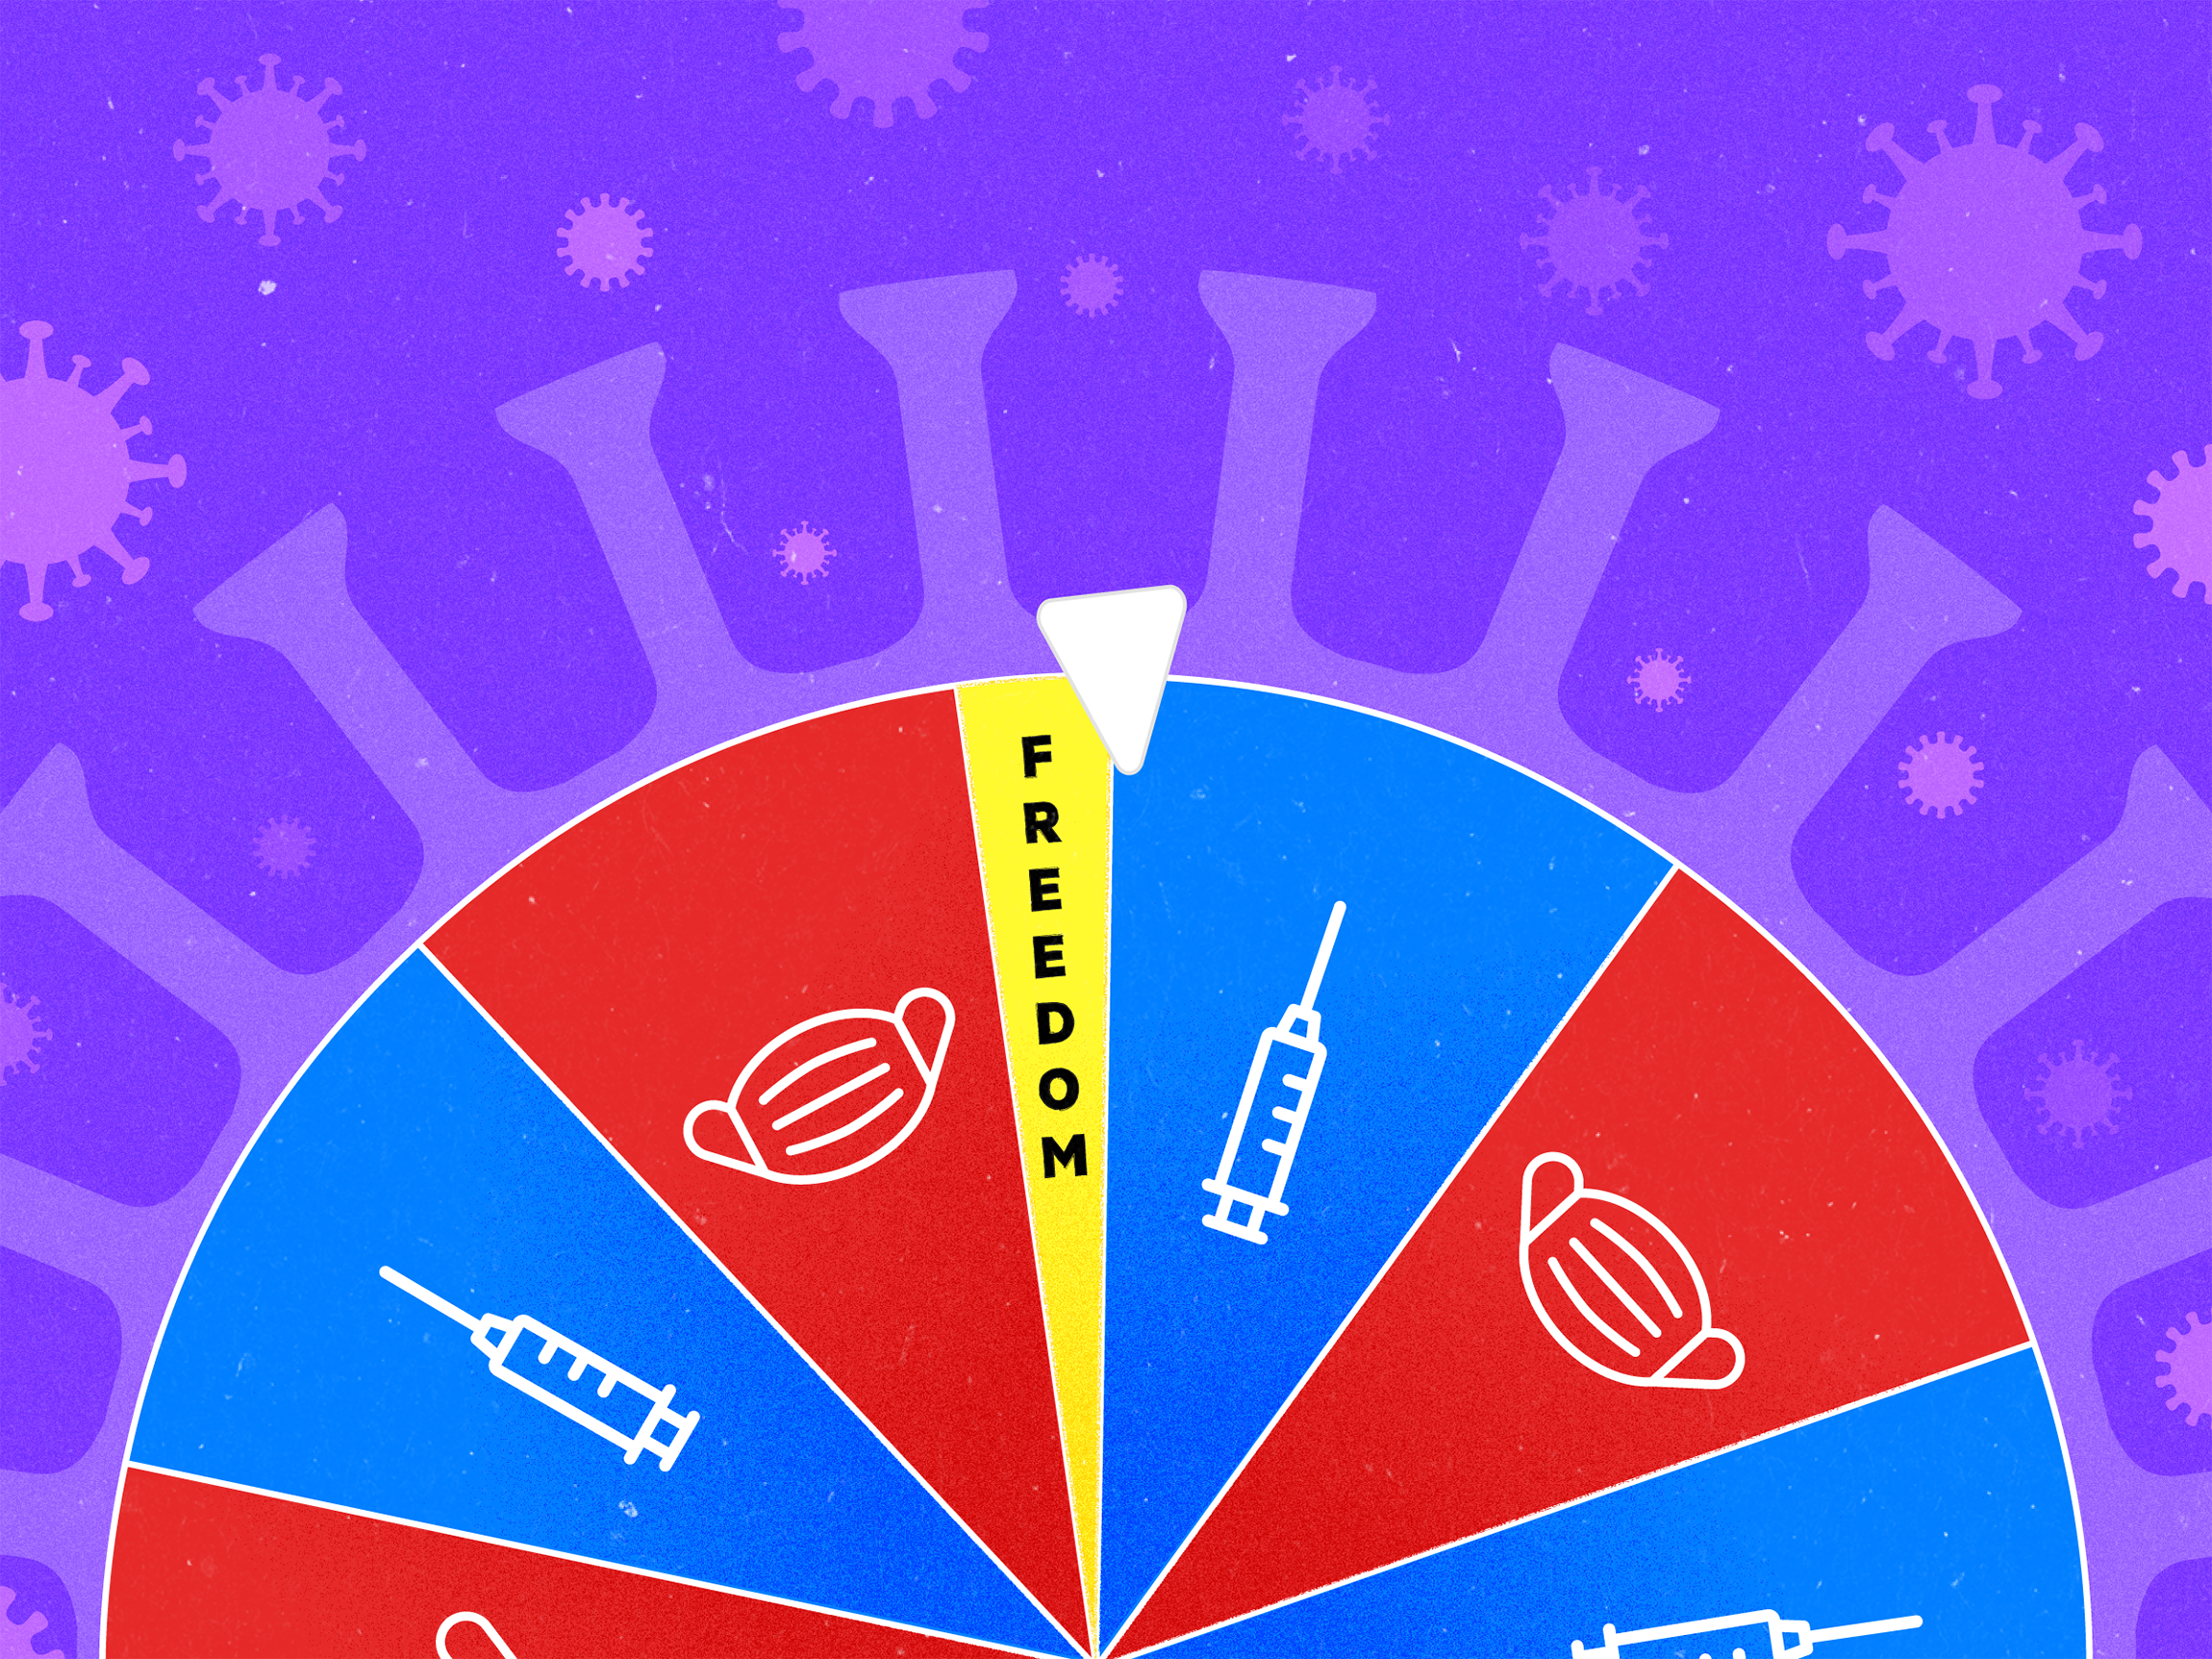 A spinning wheel with alternating blue and red vaccine and mask options and a single small yellow option labeled "FREEDOM." The background is purple and smaller coronavirus shapes are scattered around.